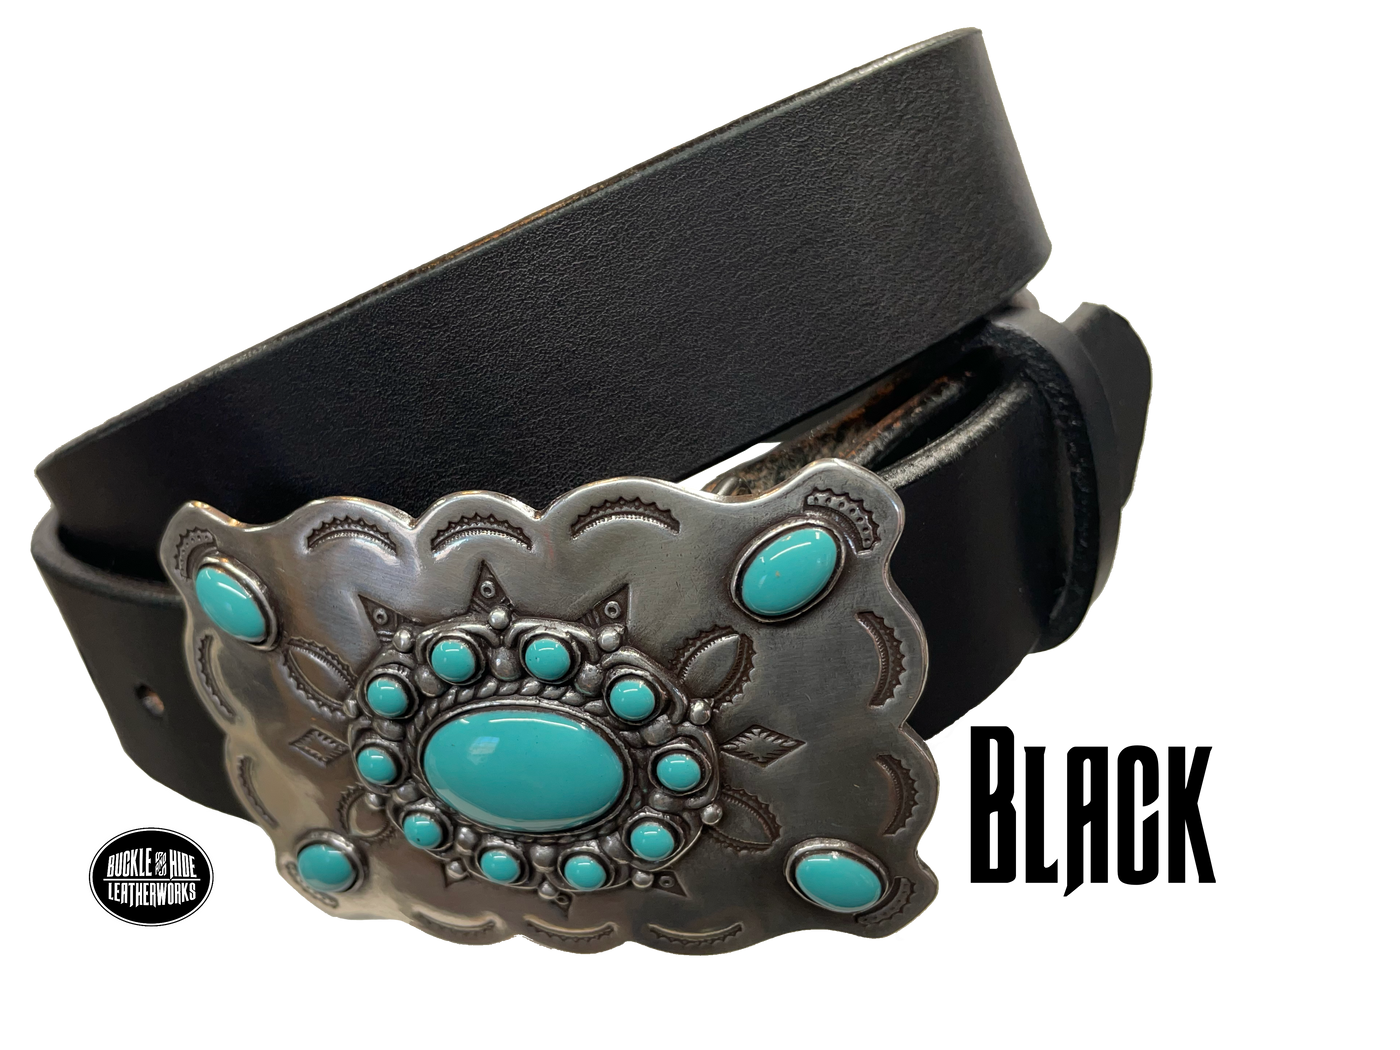 Southwestern style belt buckle with Southwestern tooling, scalloped design around edges, and simulated turquoise stones, approx. size 3 1/2" wide by 2 1/2" tall.  Color is antique silver, buckle is made of zinc. Fits belts 1 1/2" wide. Belt is handmade from a single strip of leather, choose from either distressed brown, black, or dark brown. CHOOSE ONE BELT STRIP COLOR! Available online and in our shop just outside Nashville in Smyrna, TN. Black belt.